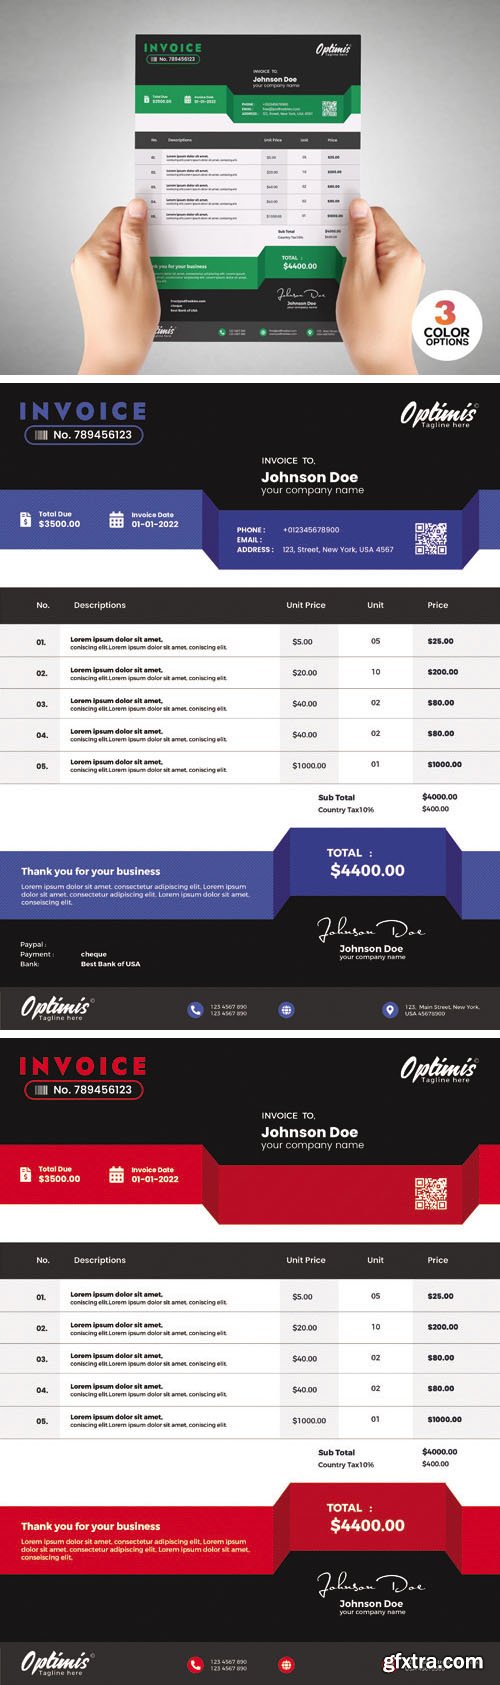 Payment Invoice PSD Template